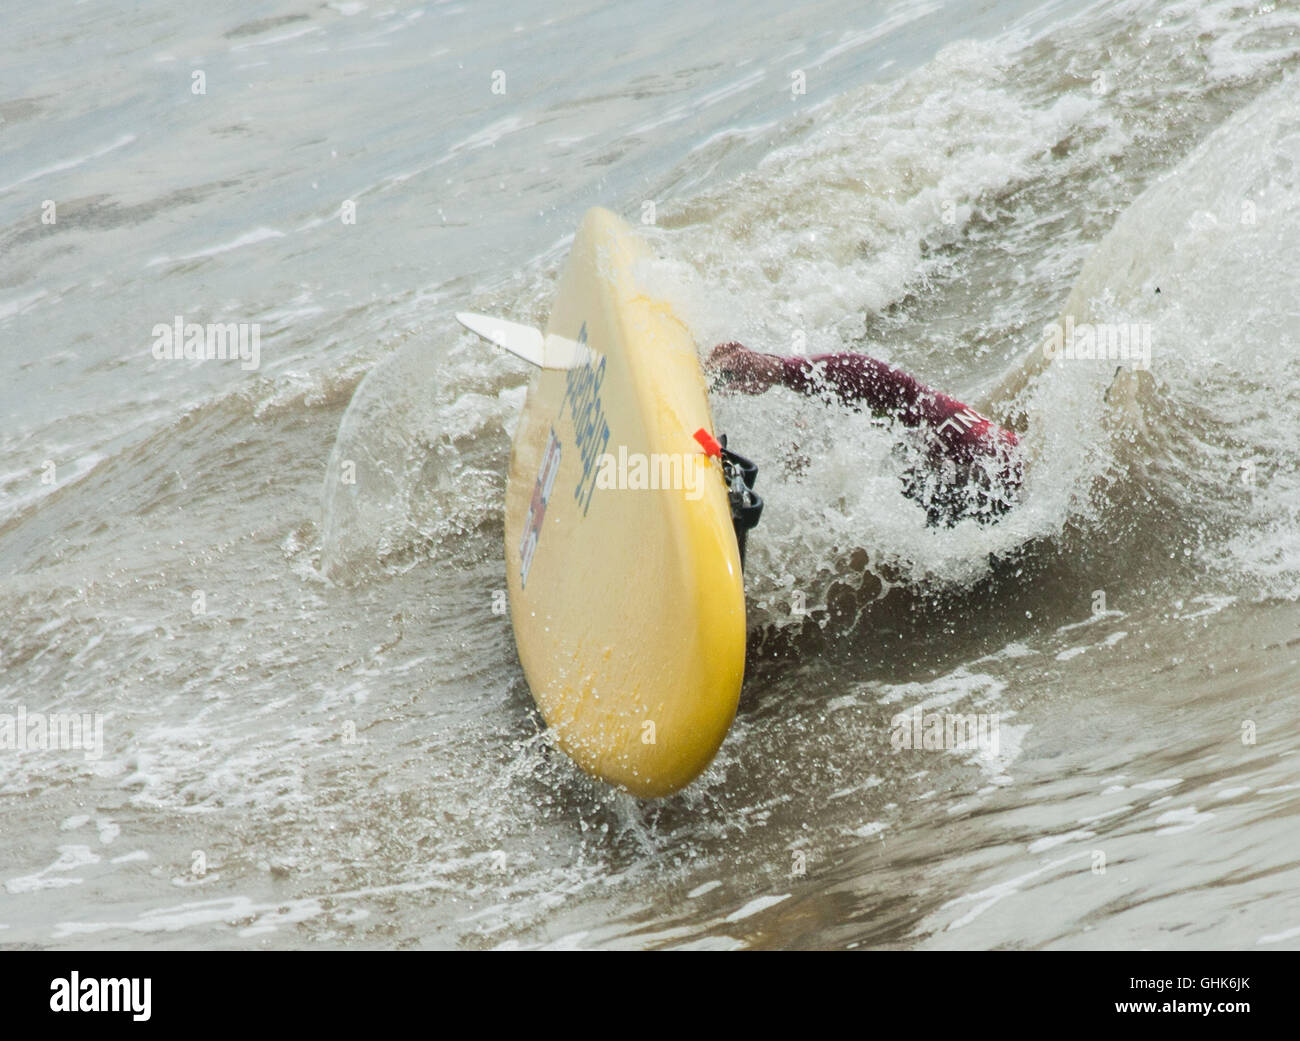 Surfers and surfboards, kayak's and kayaks, beach life and summer days Stock Photo